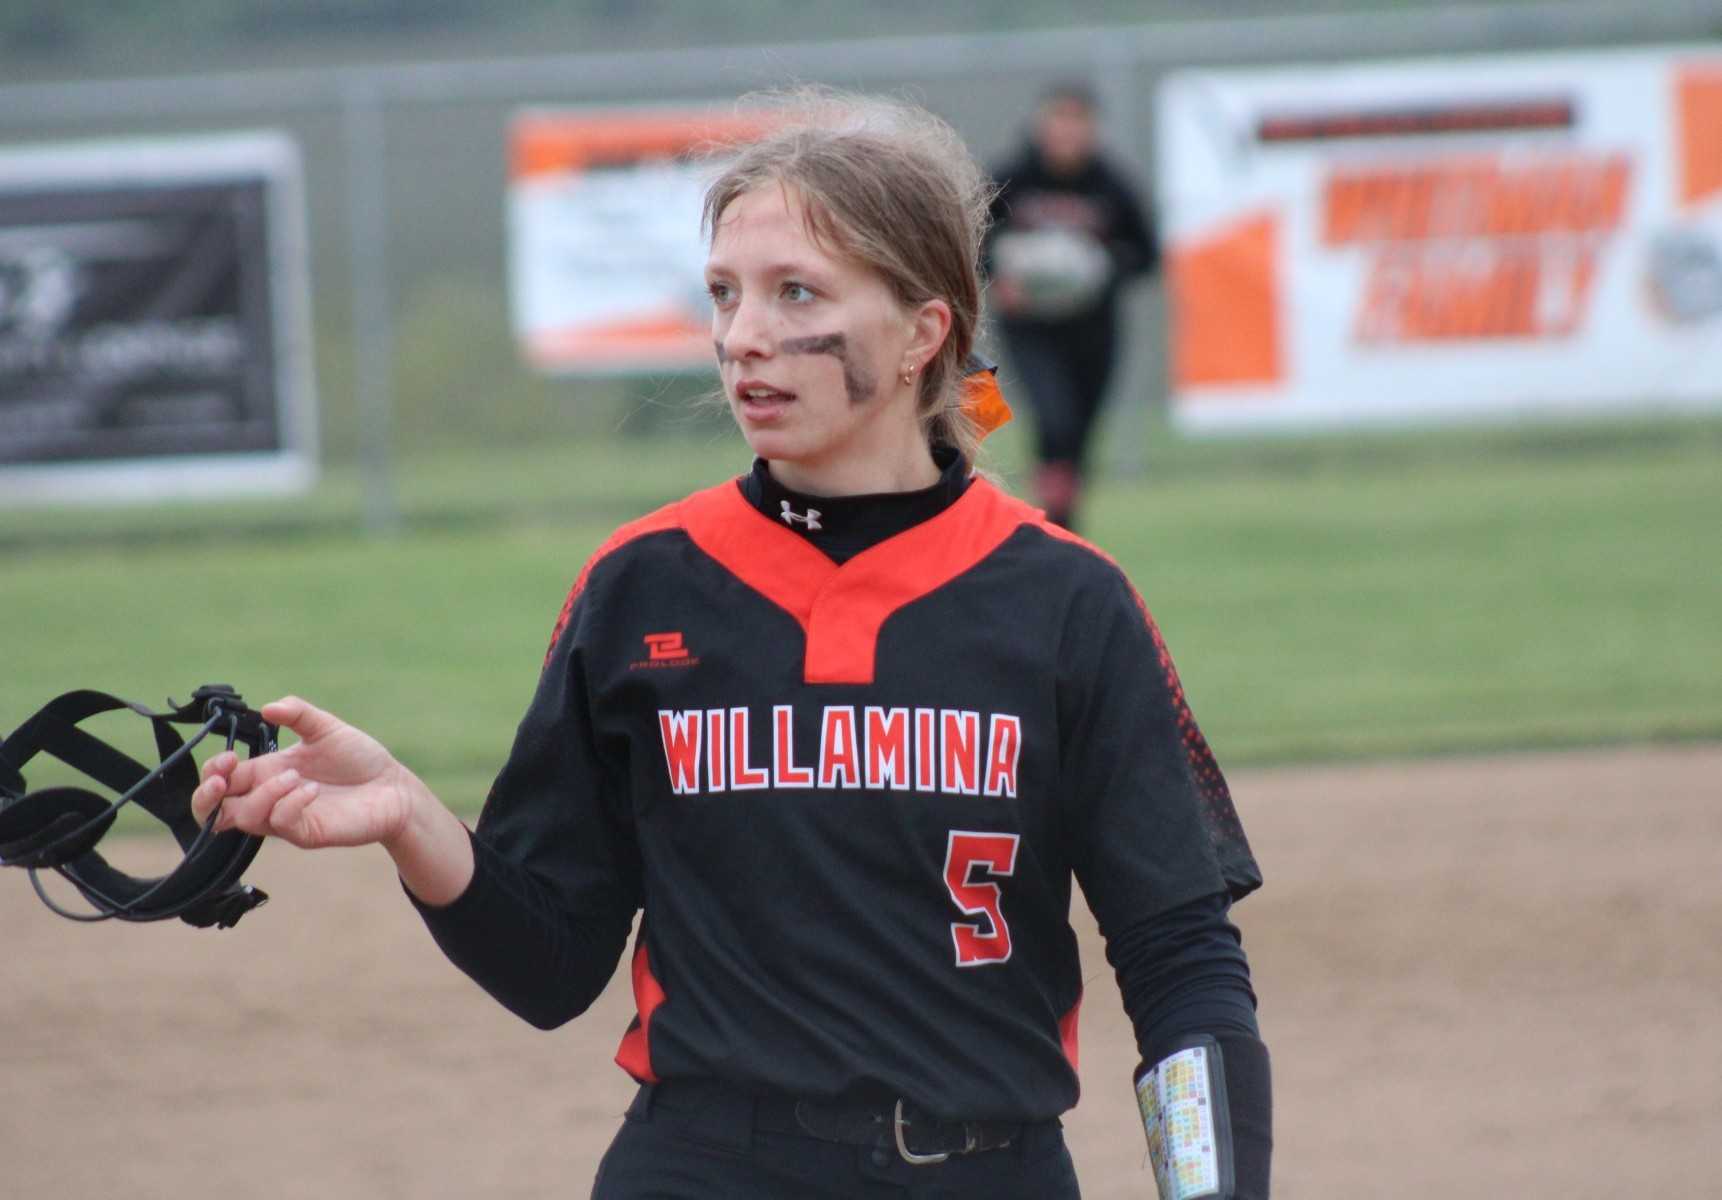 Willamina's Laney Deloe pitched a one-hitter with 13 strikeouts to beat St. Paul 8-0 in a 2A/1A game. (Photo by Jeremy McDonald)